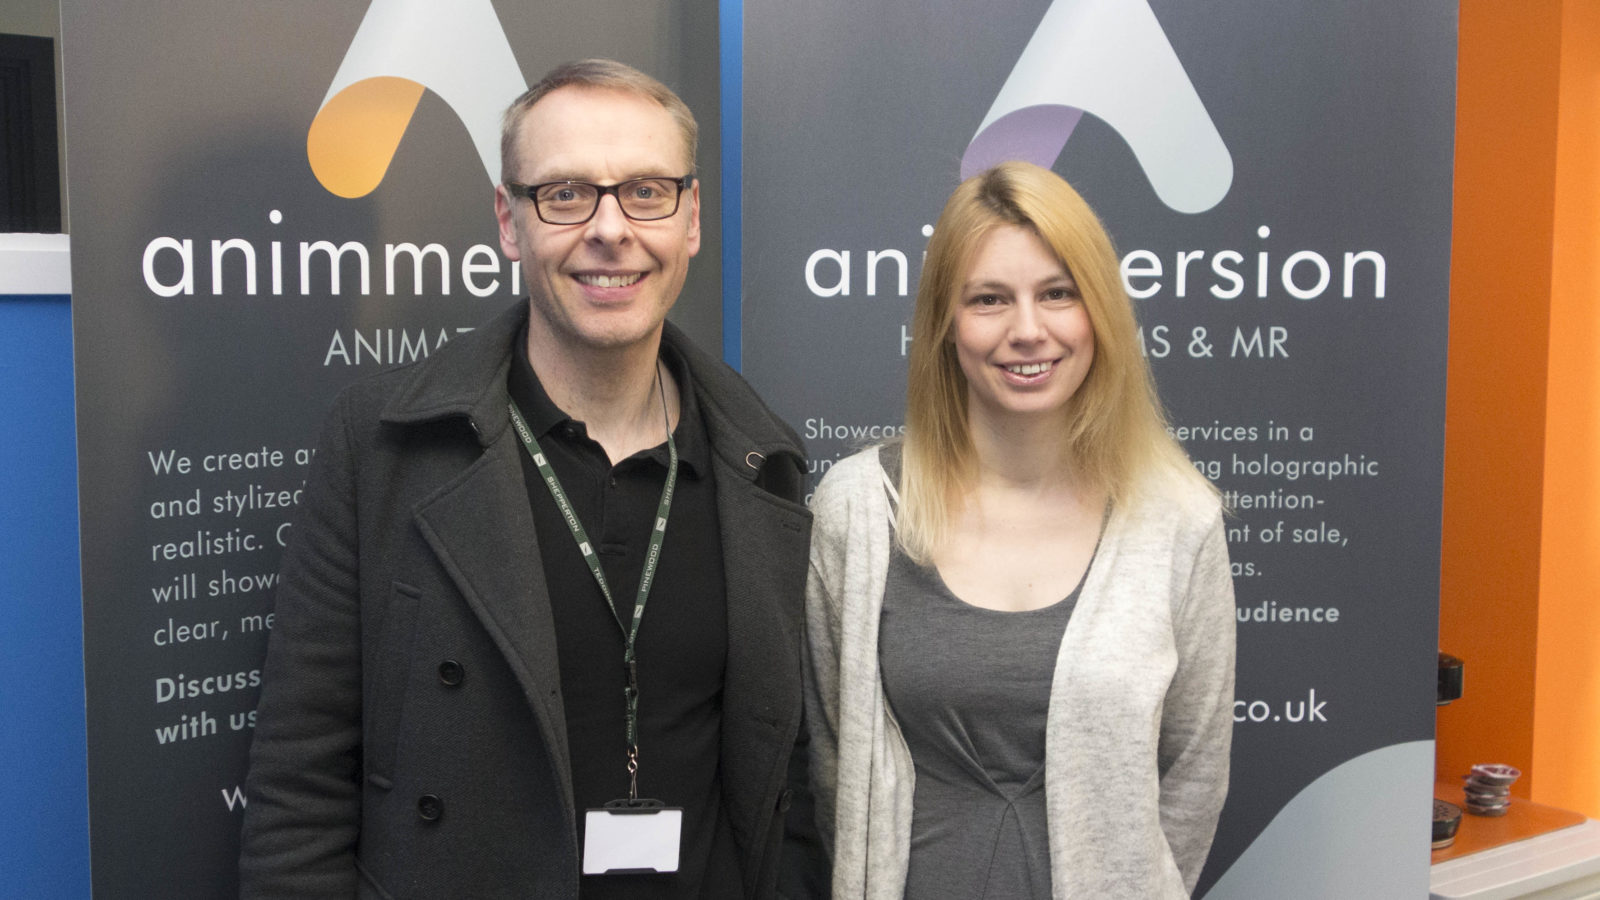 Animmersion to expand its business